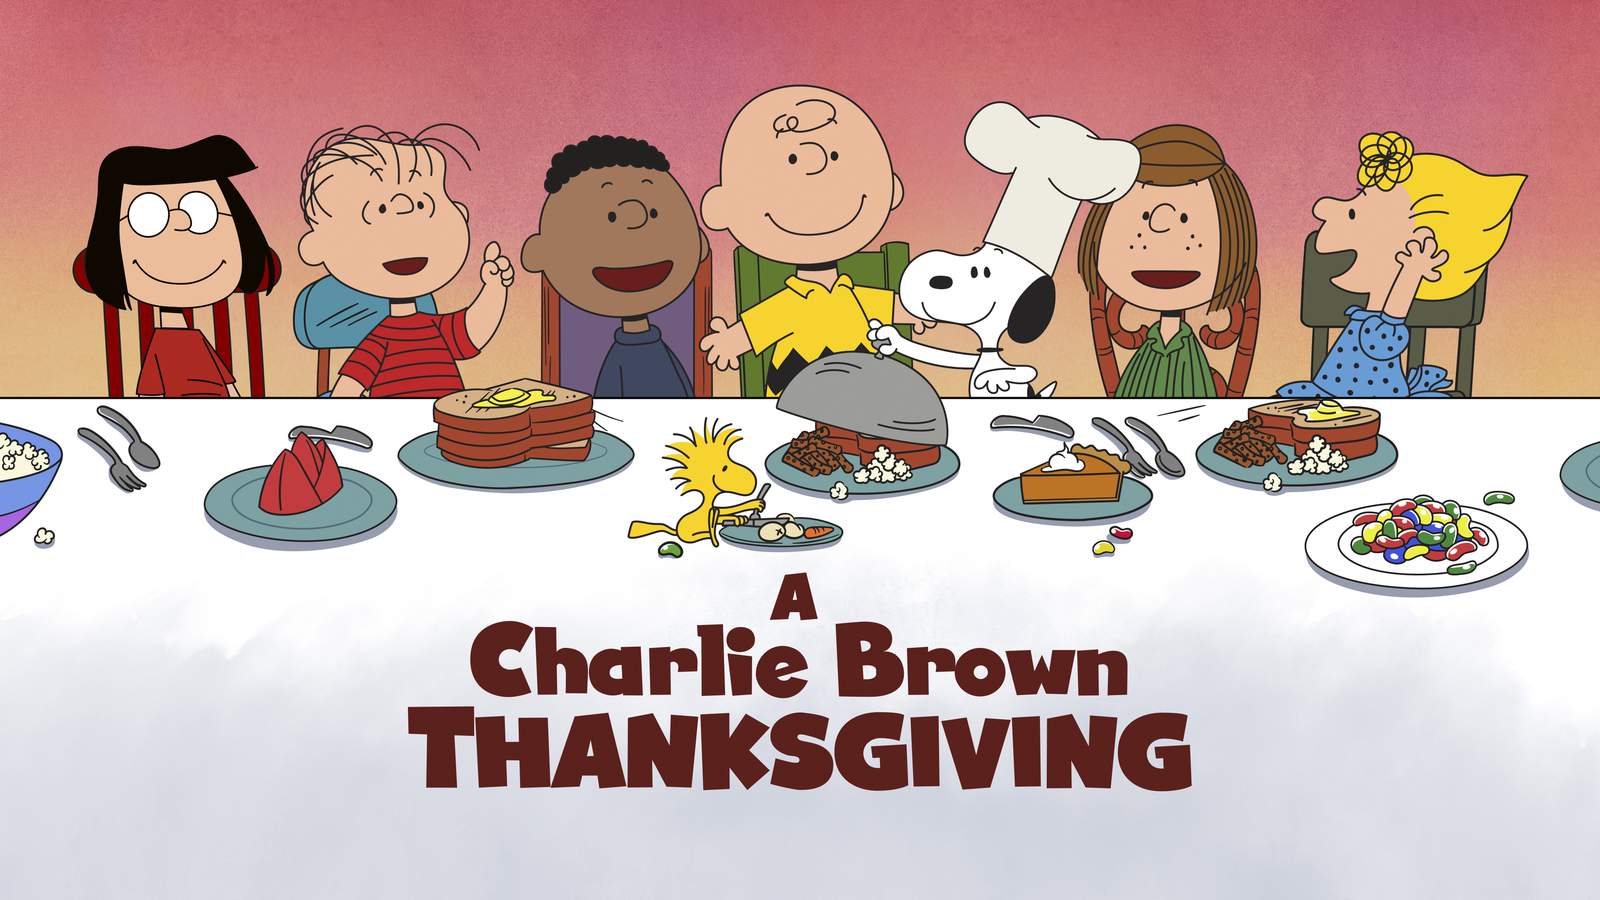 Charlie Brown specials to air on TV, after all, in PBS deal